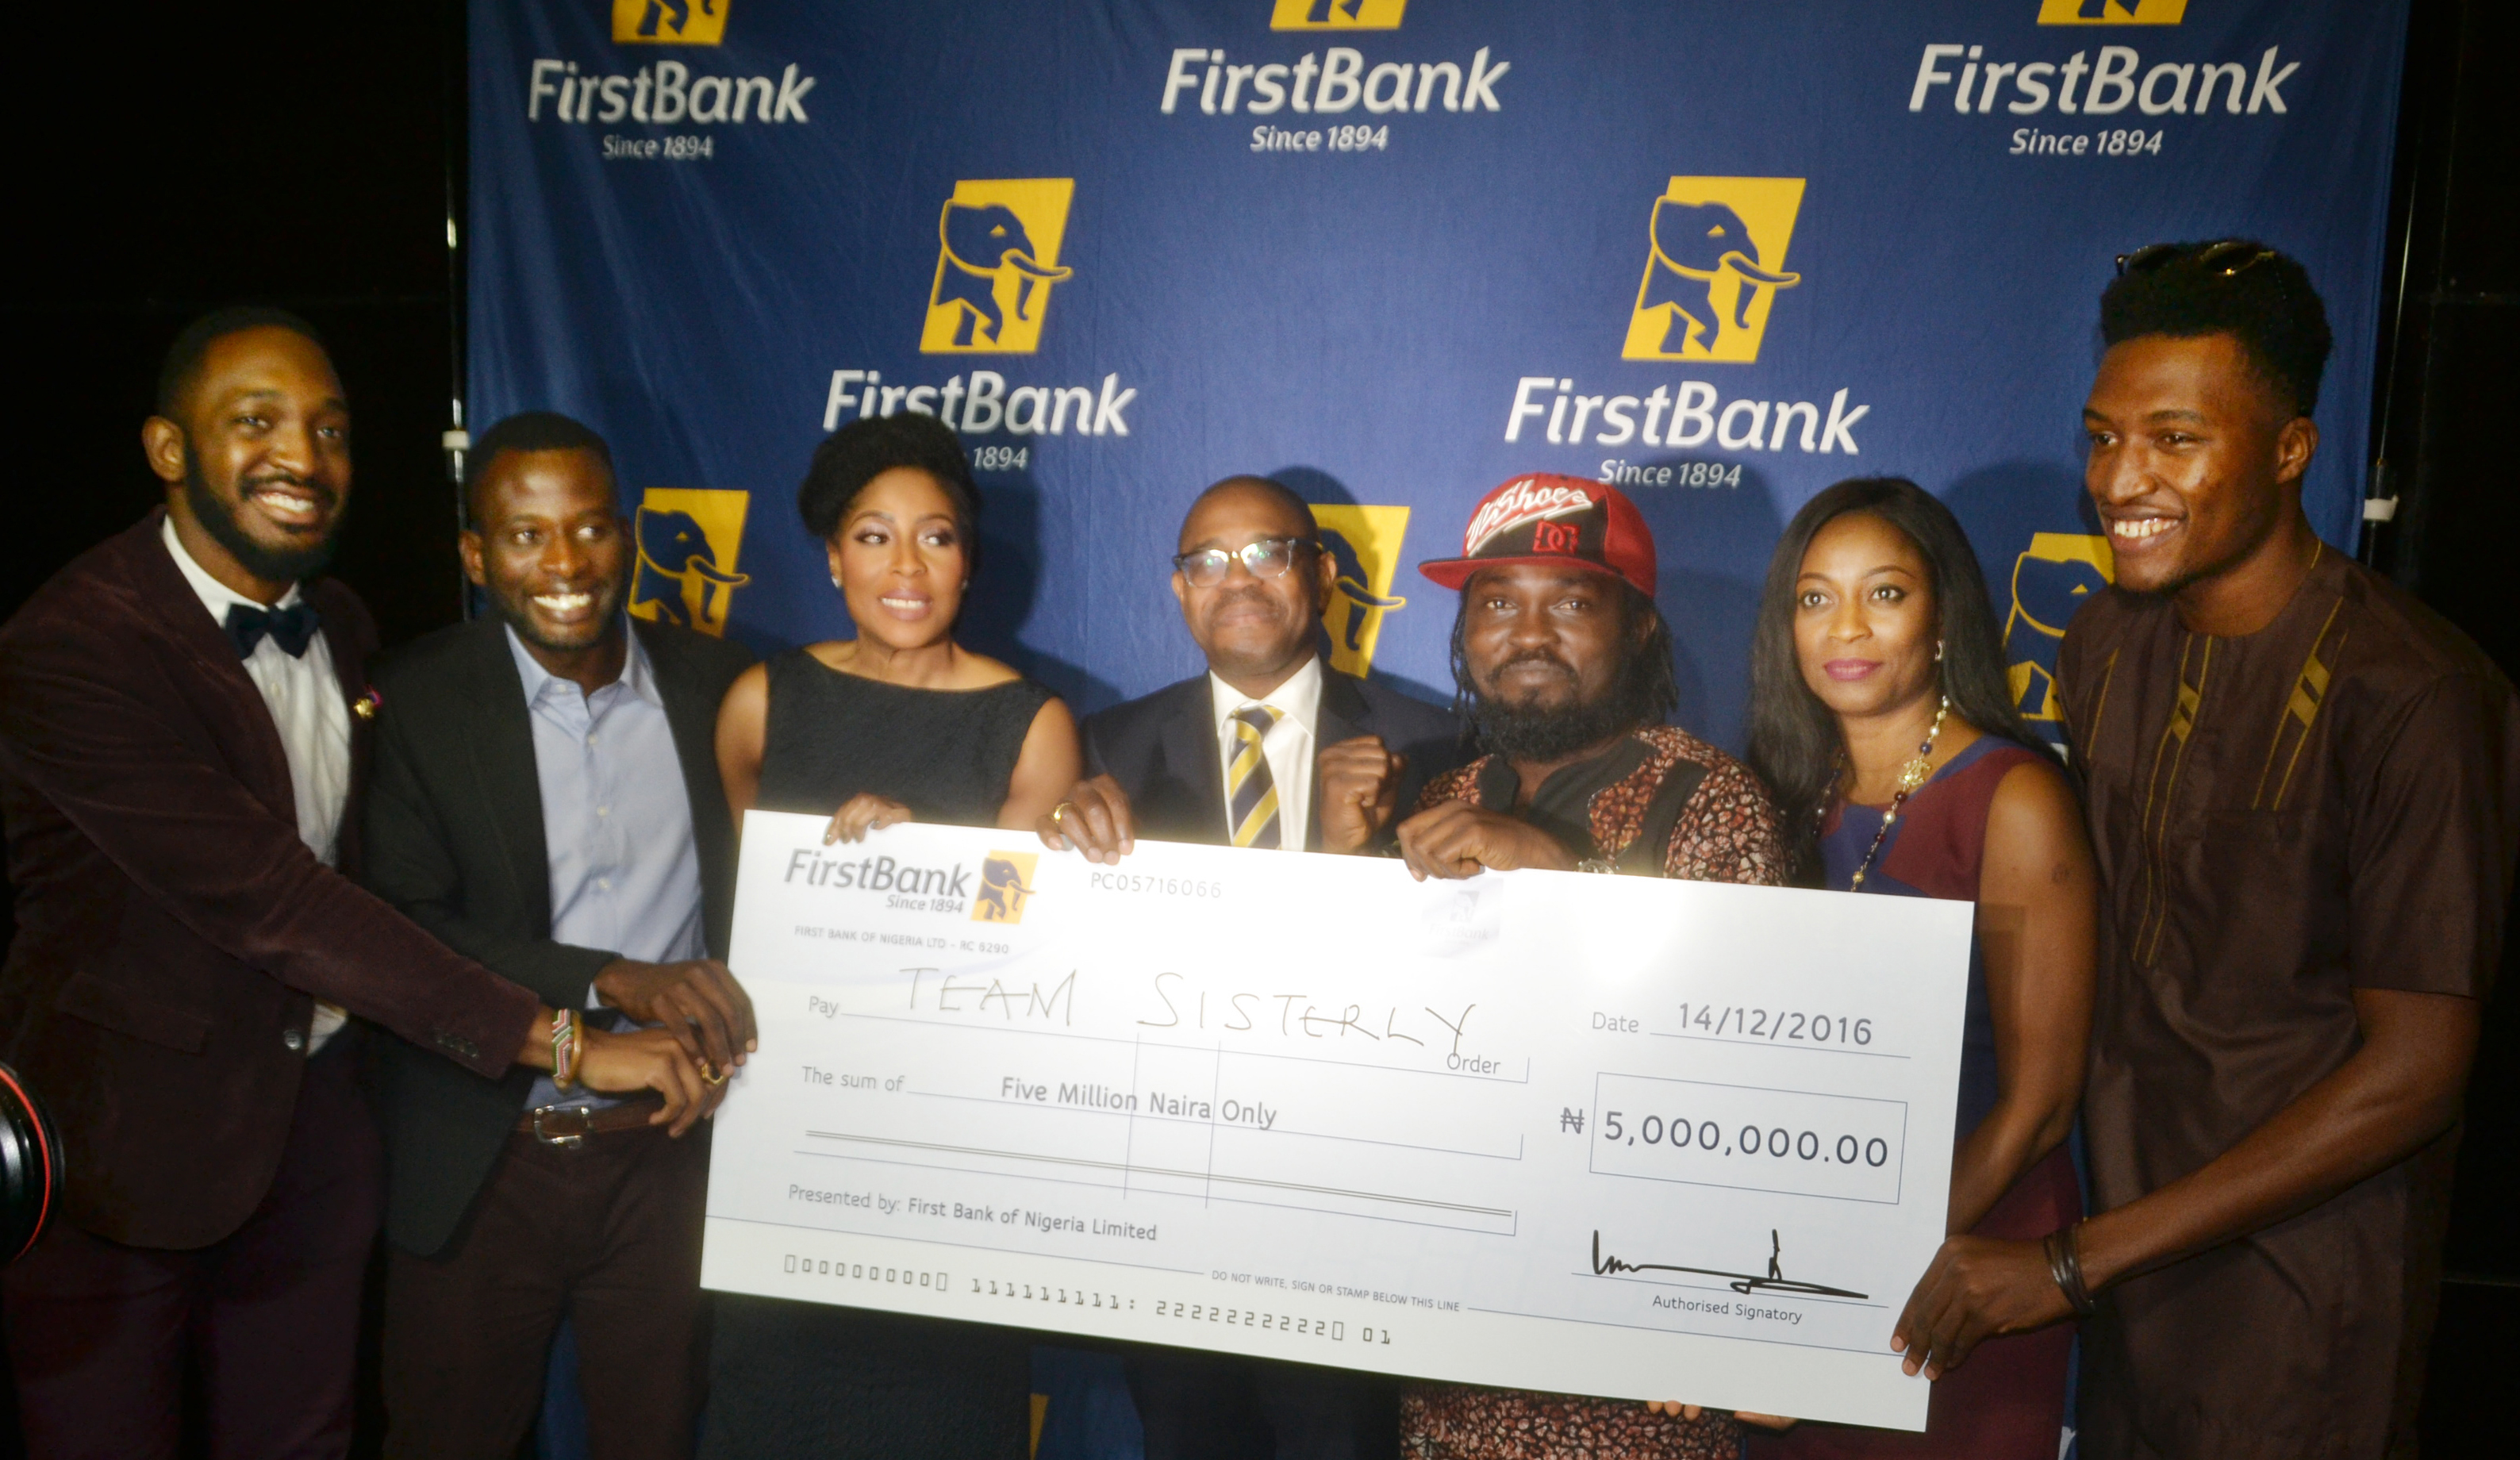  Deputy Managing Director, FirstBank, Gbenga Shobo (Middle); Executive Chairman and CEO of EbonyLife TV, Mo Abudu ( third left); Group Head, Marketing and Corporate Communications, FirstBank, Folake Ani-Mumuney (second right) presenting the star prize to the winners of the FirstBank FirstStars Reality TV show (Team Sisterly) .